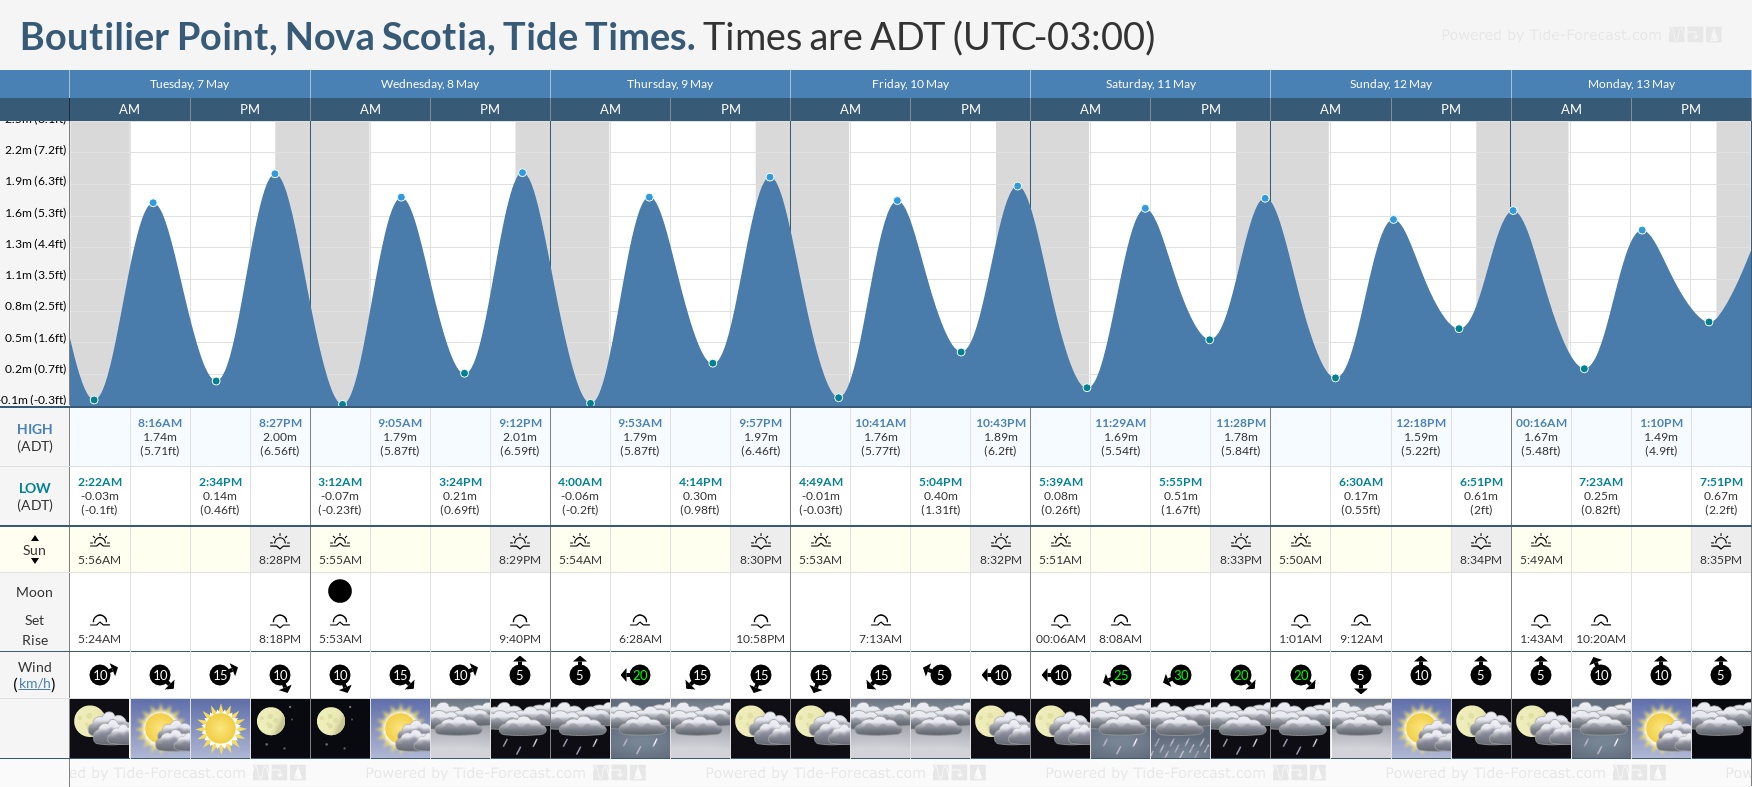 Boutilier Point, Nova Scotia Tide Chart including high and low tide tide times for the next 7 days